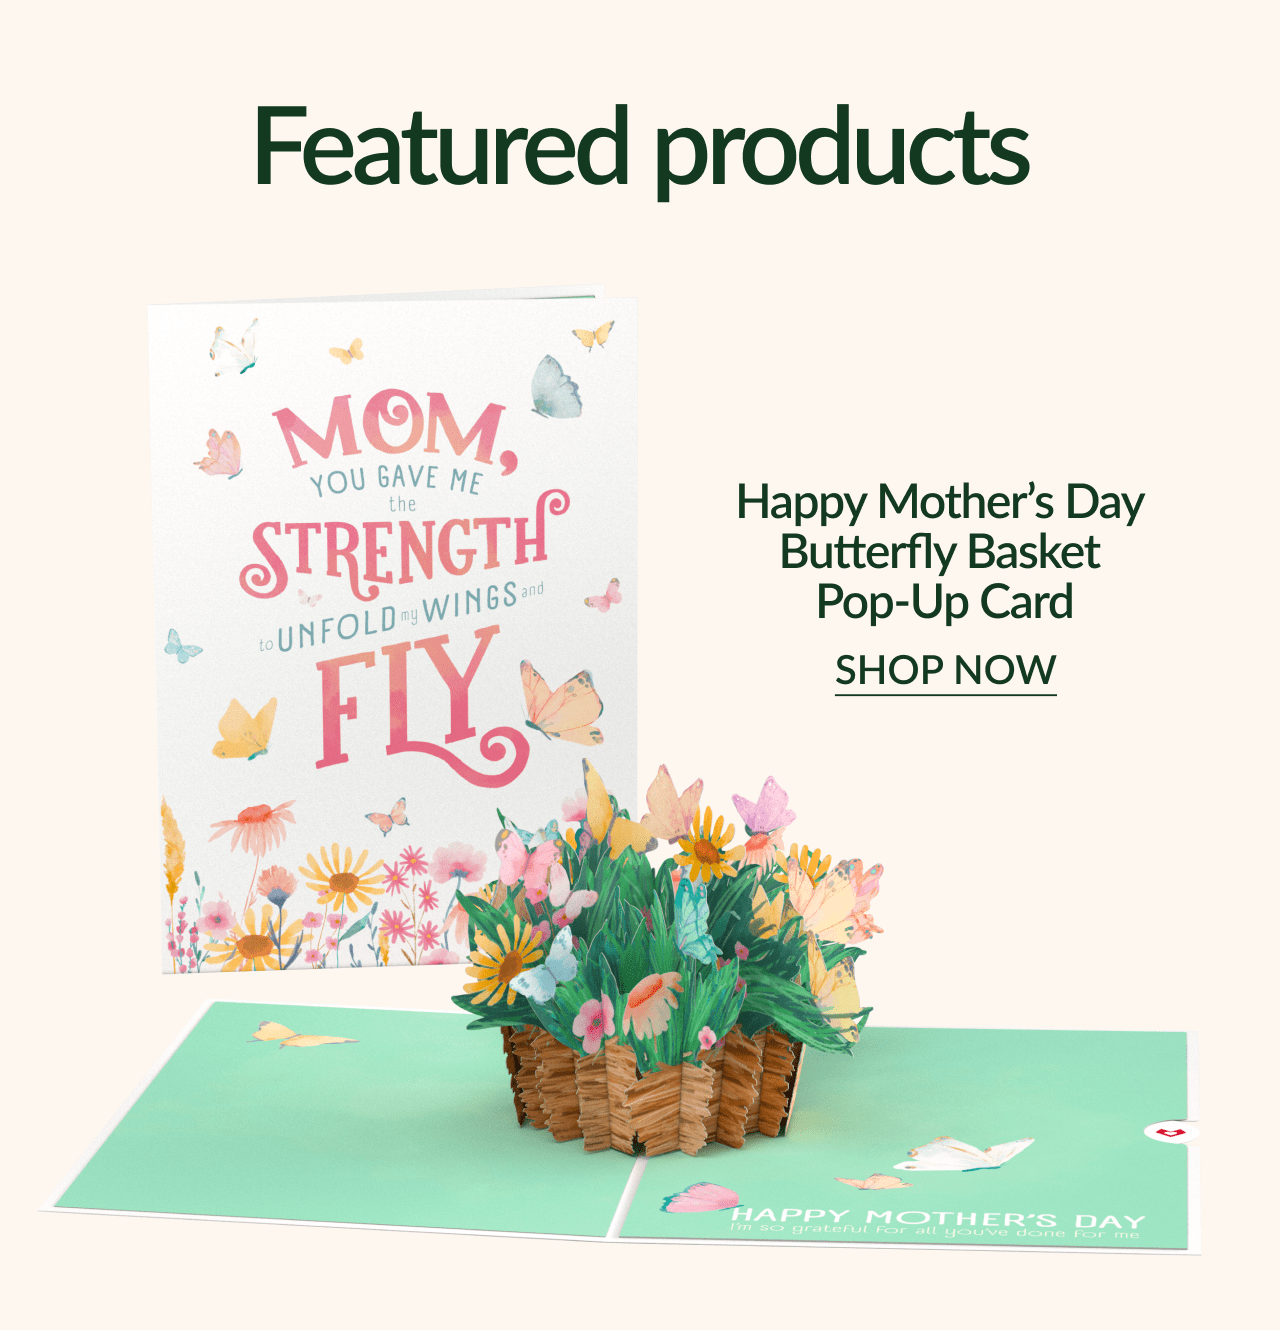 Featured products | Happy Mother's Day Butterfly Basket Pop-Up Card | SHOP NOW